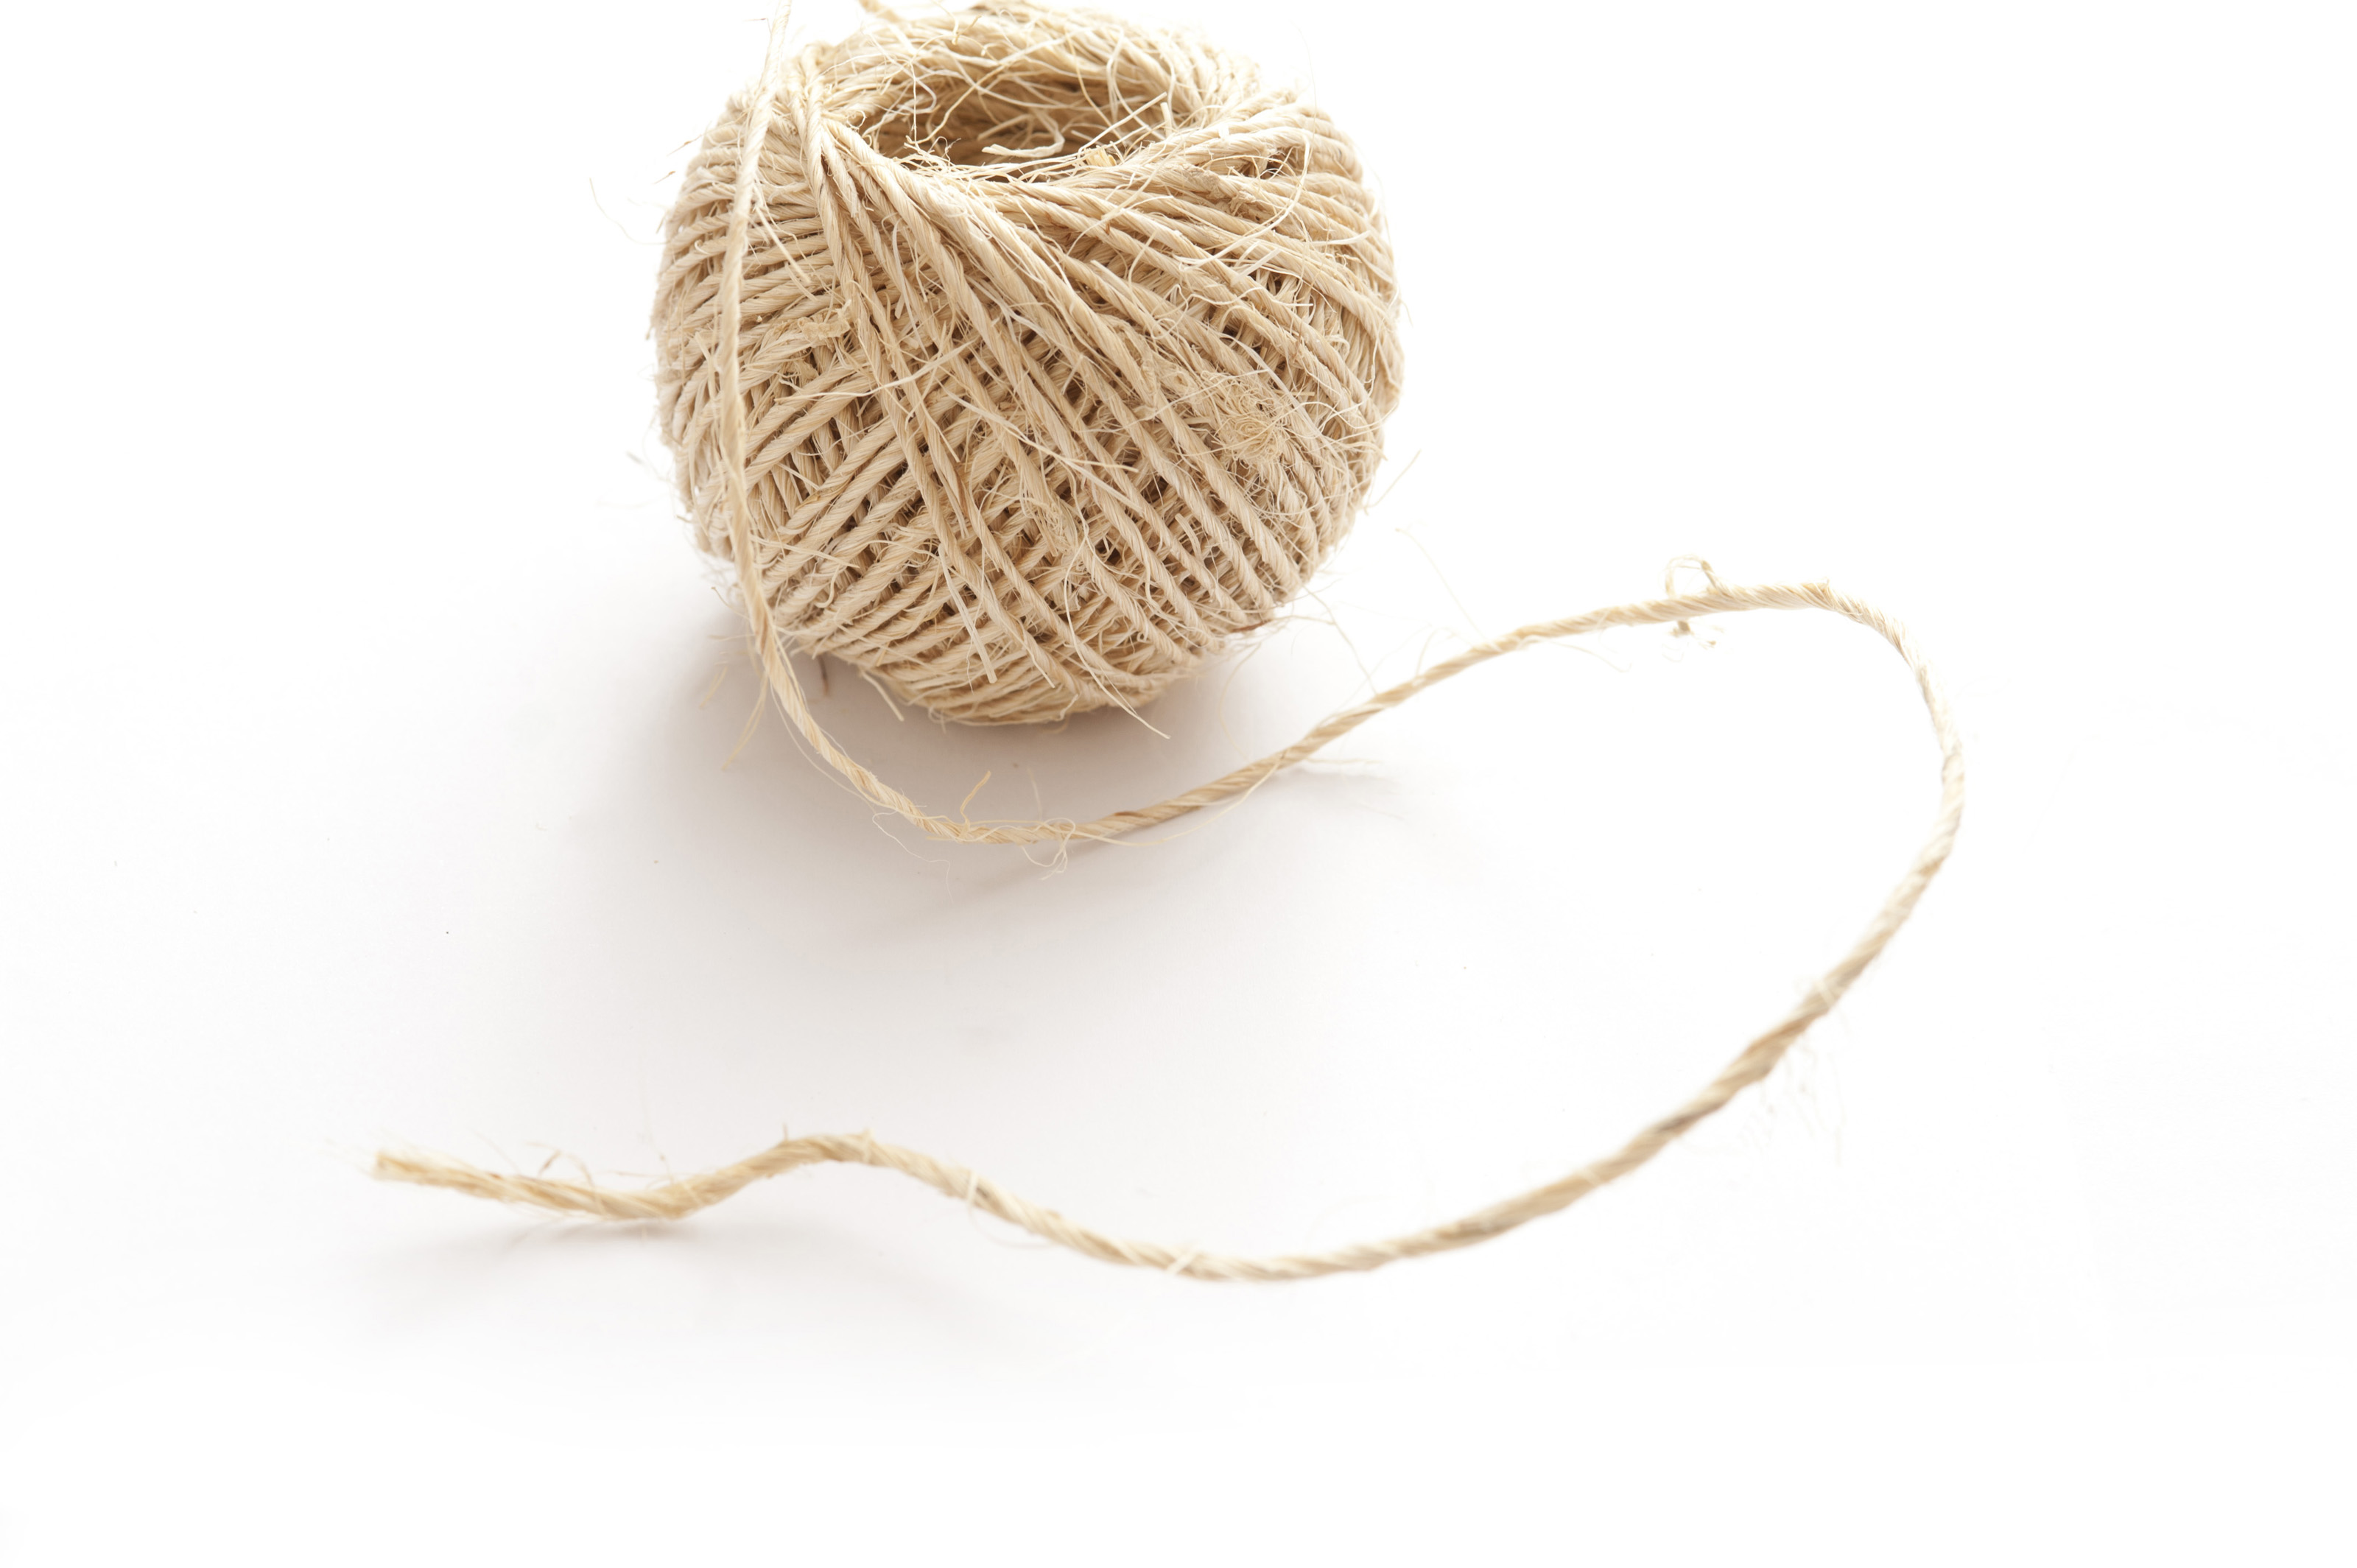 Ball of string Stock Photos, Royalty Free Ball of string Images